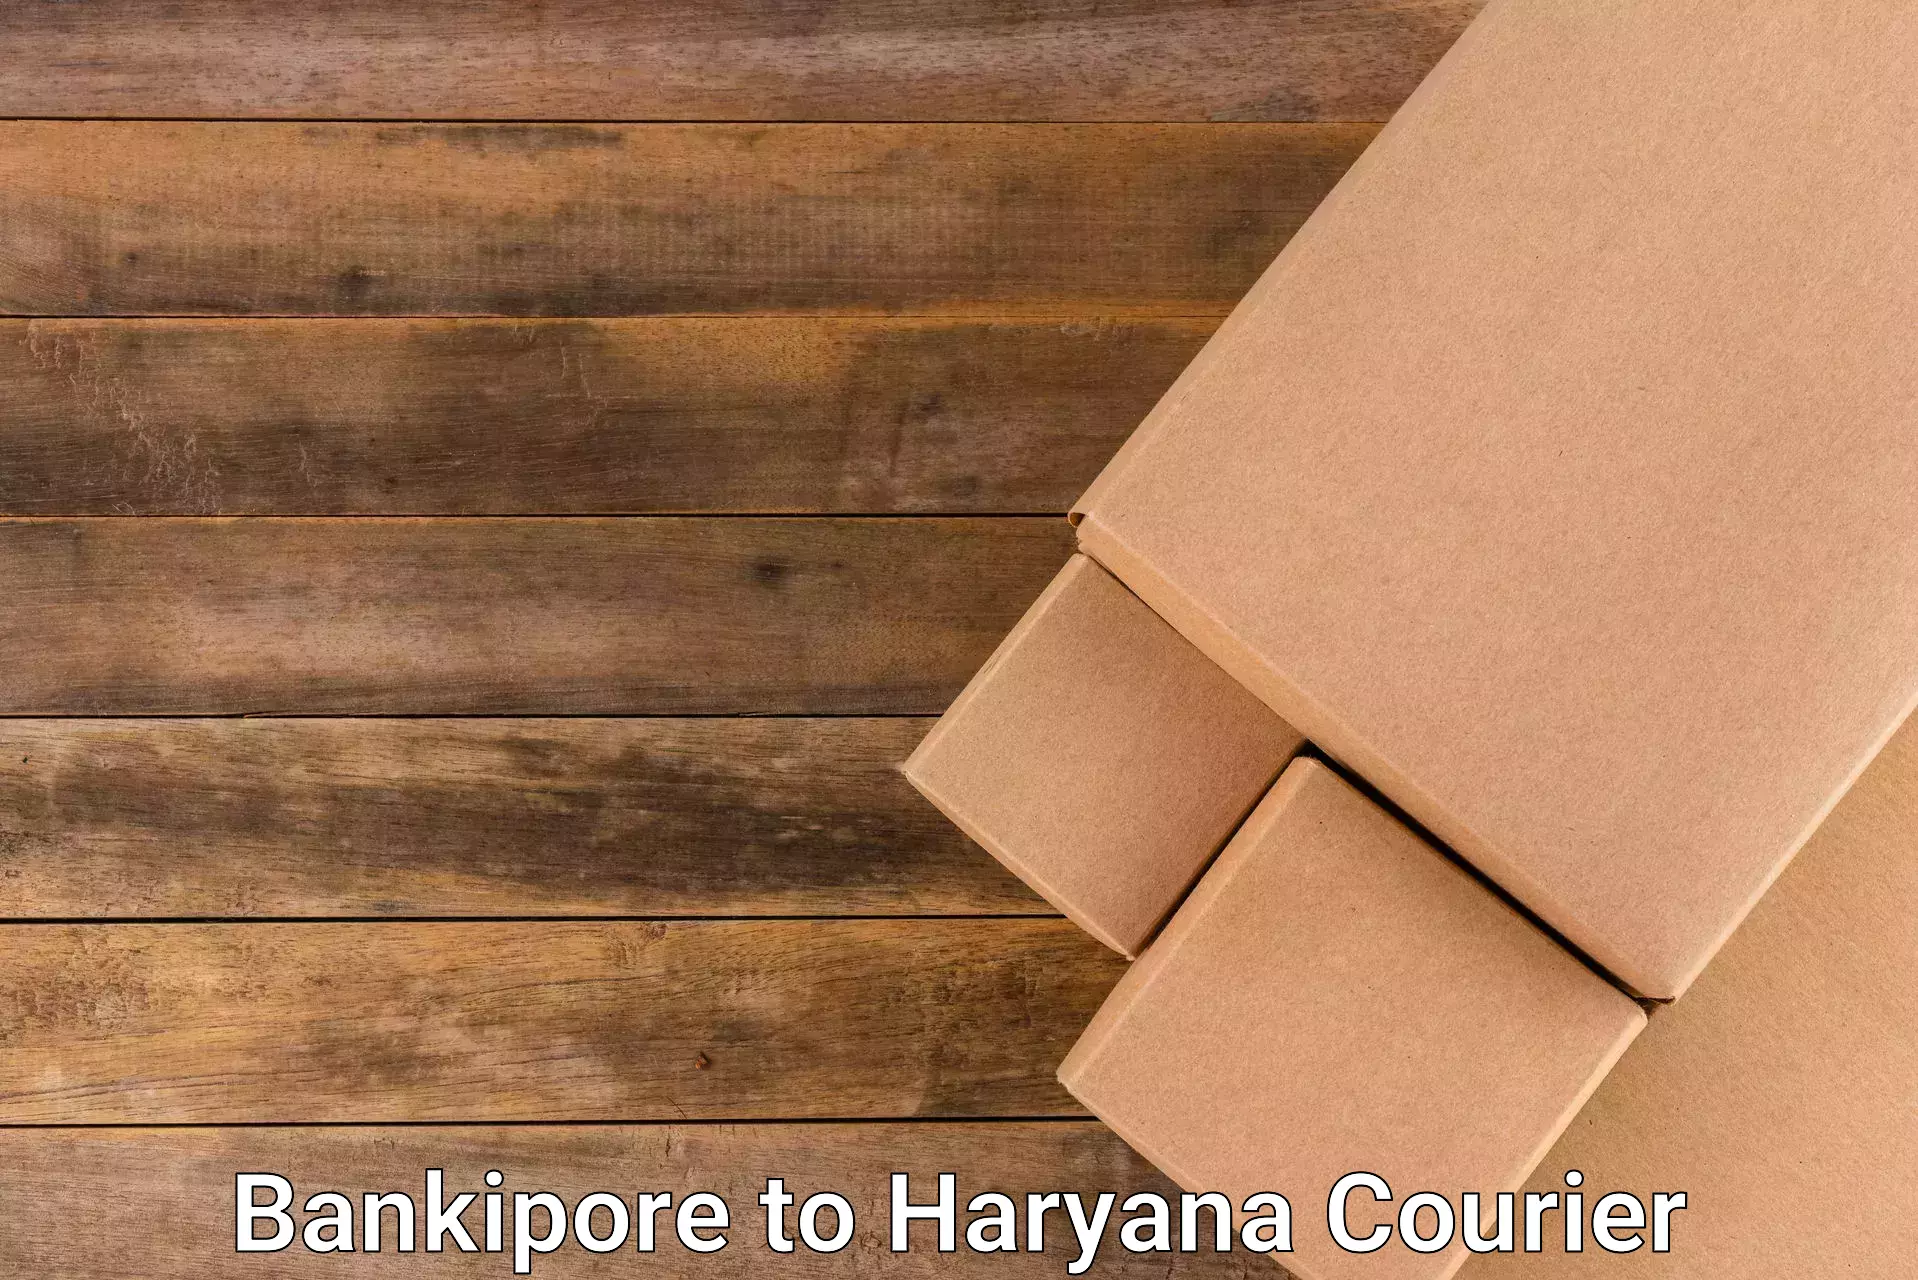 Full-service courier options Bankipore to Haryana